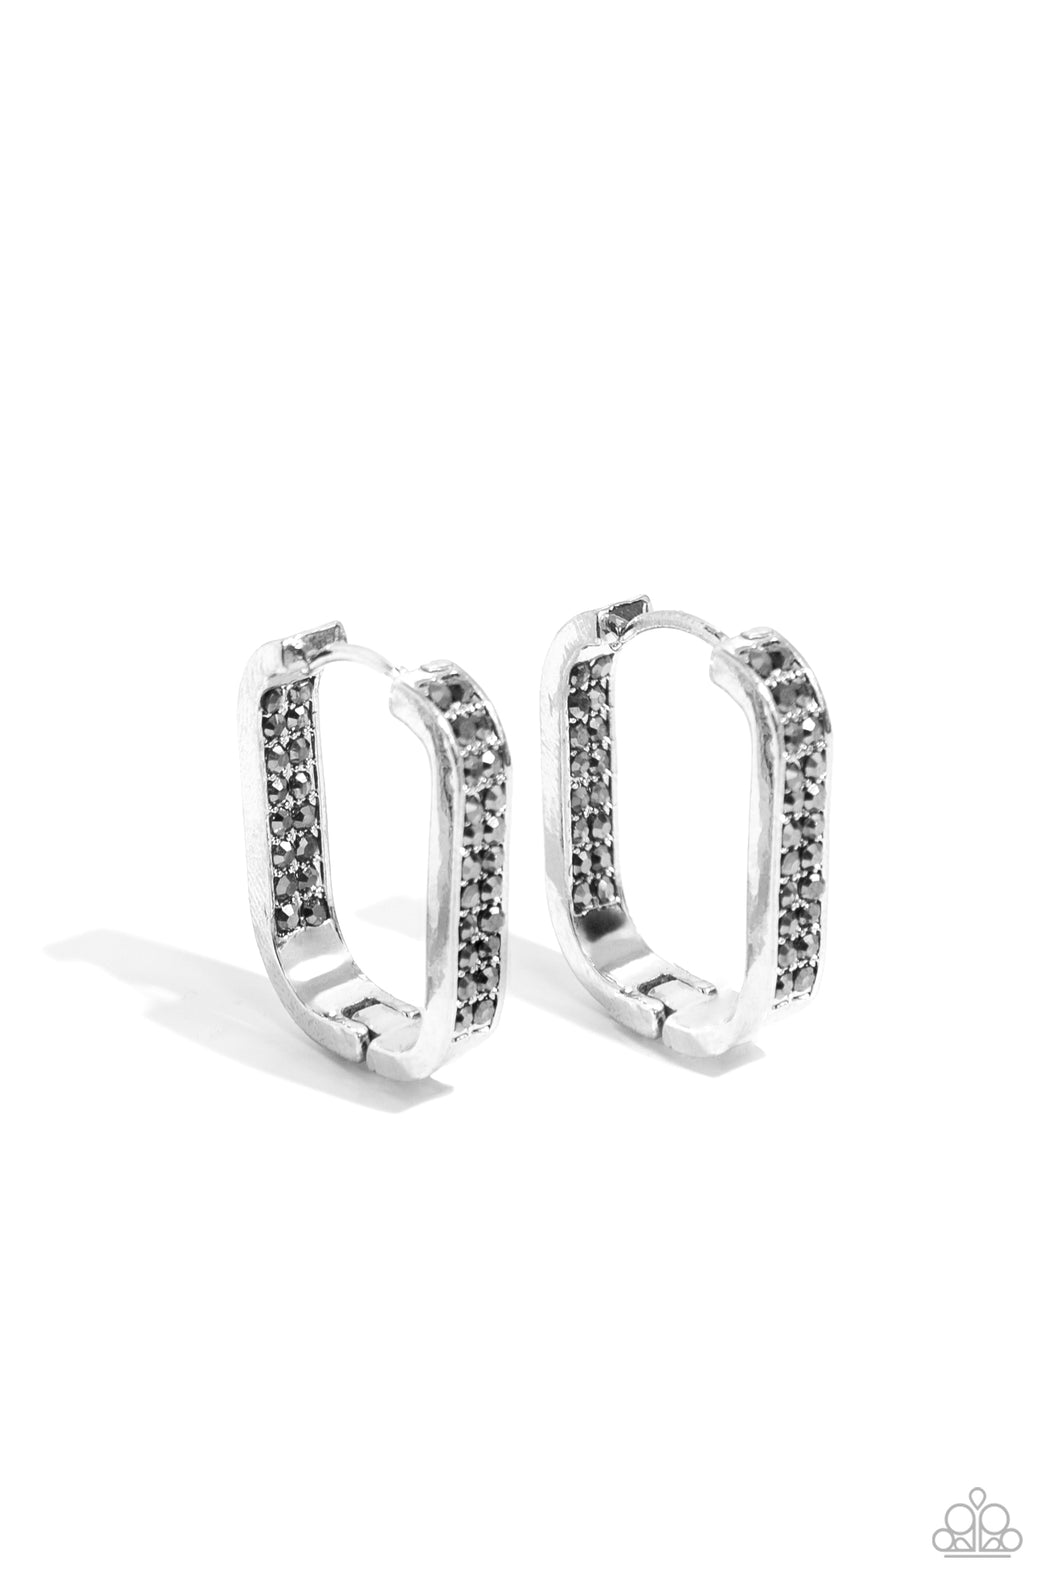 Sinuous Silhouettes - Silver Earring